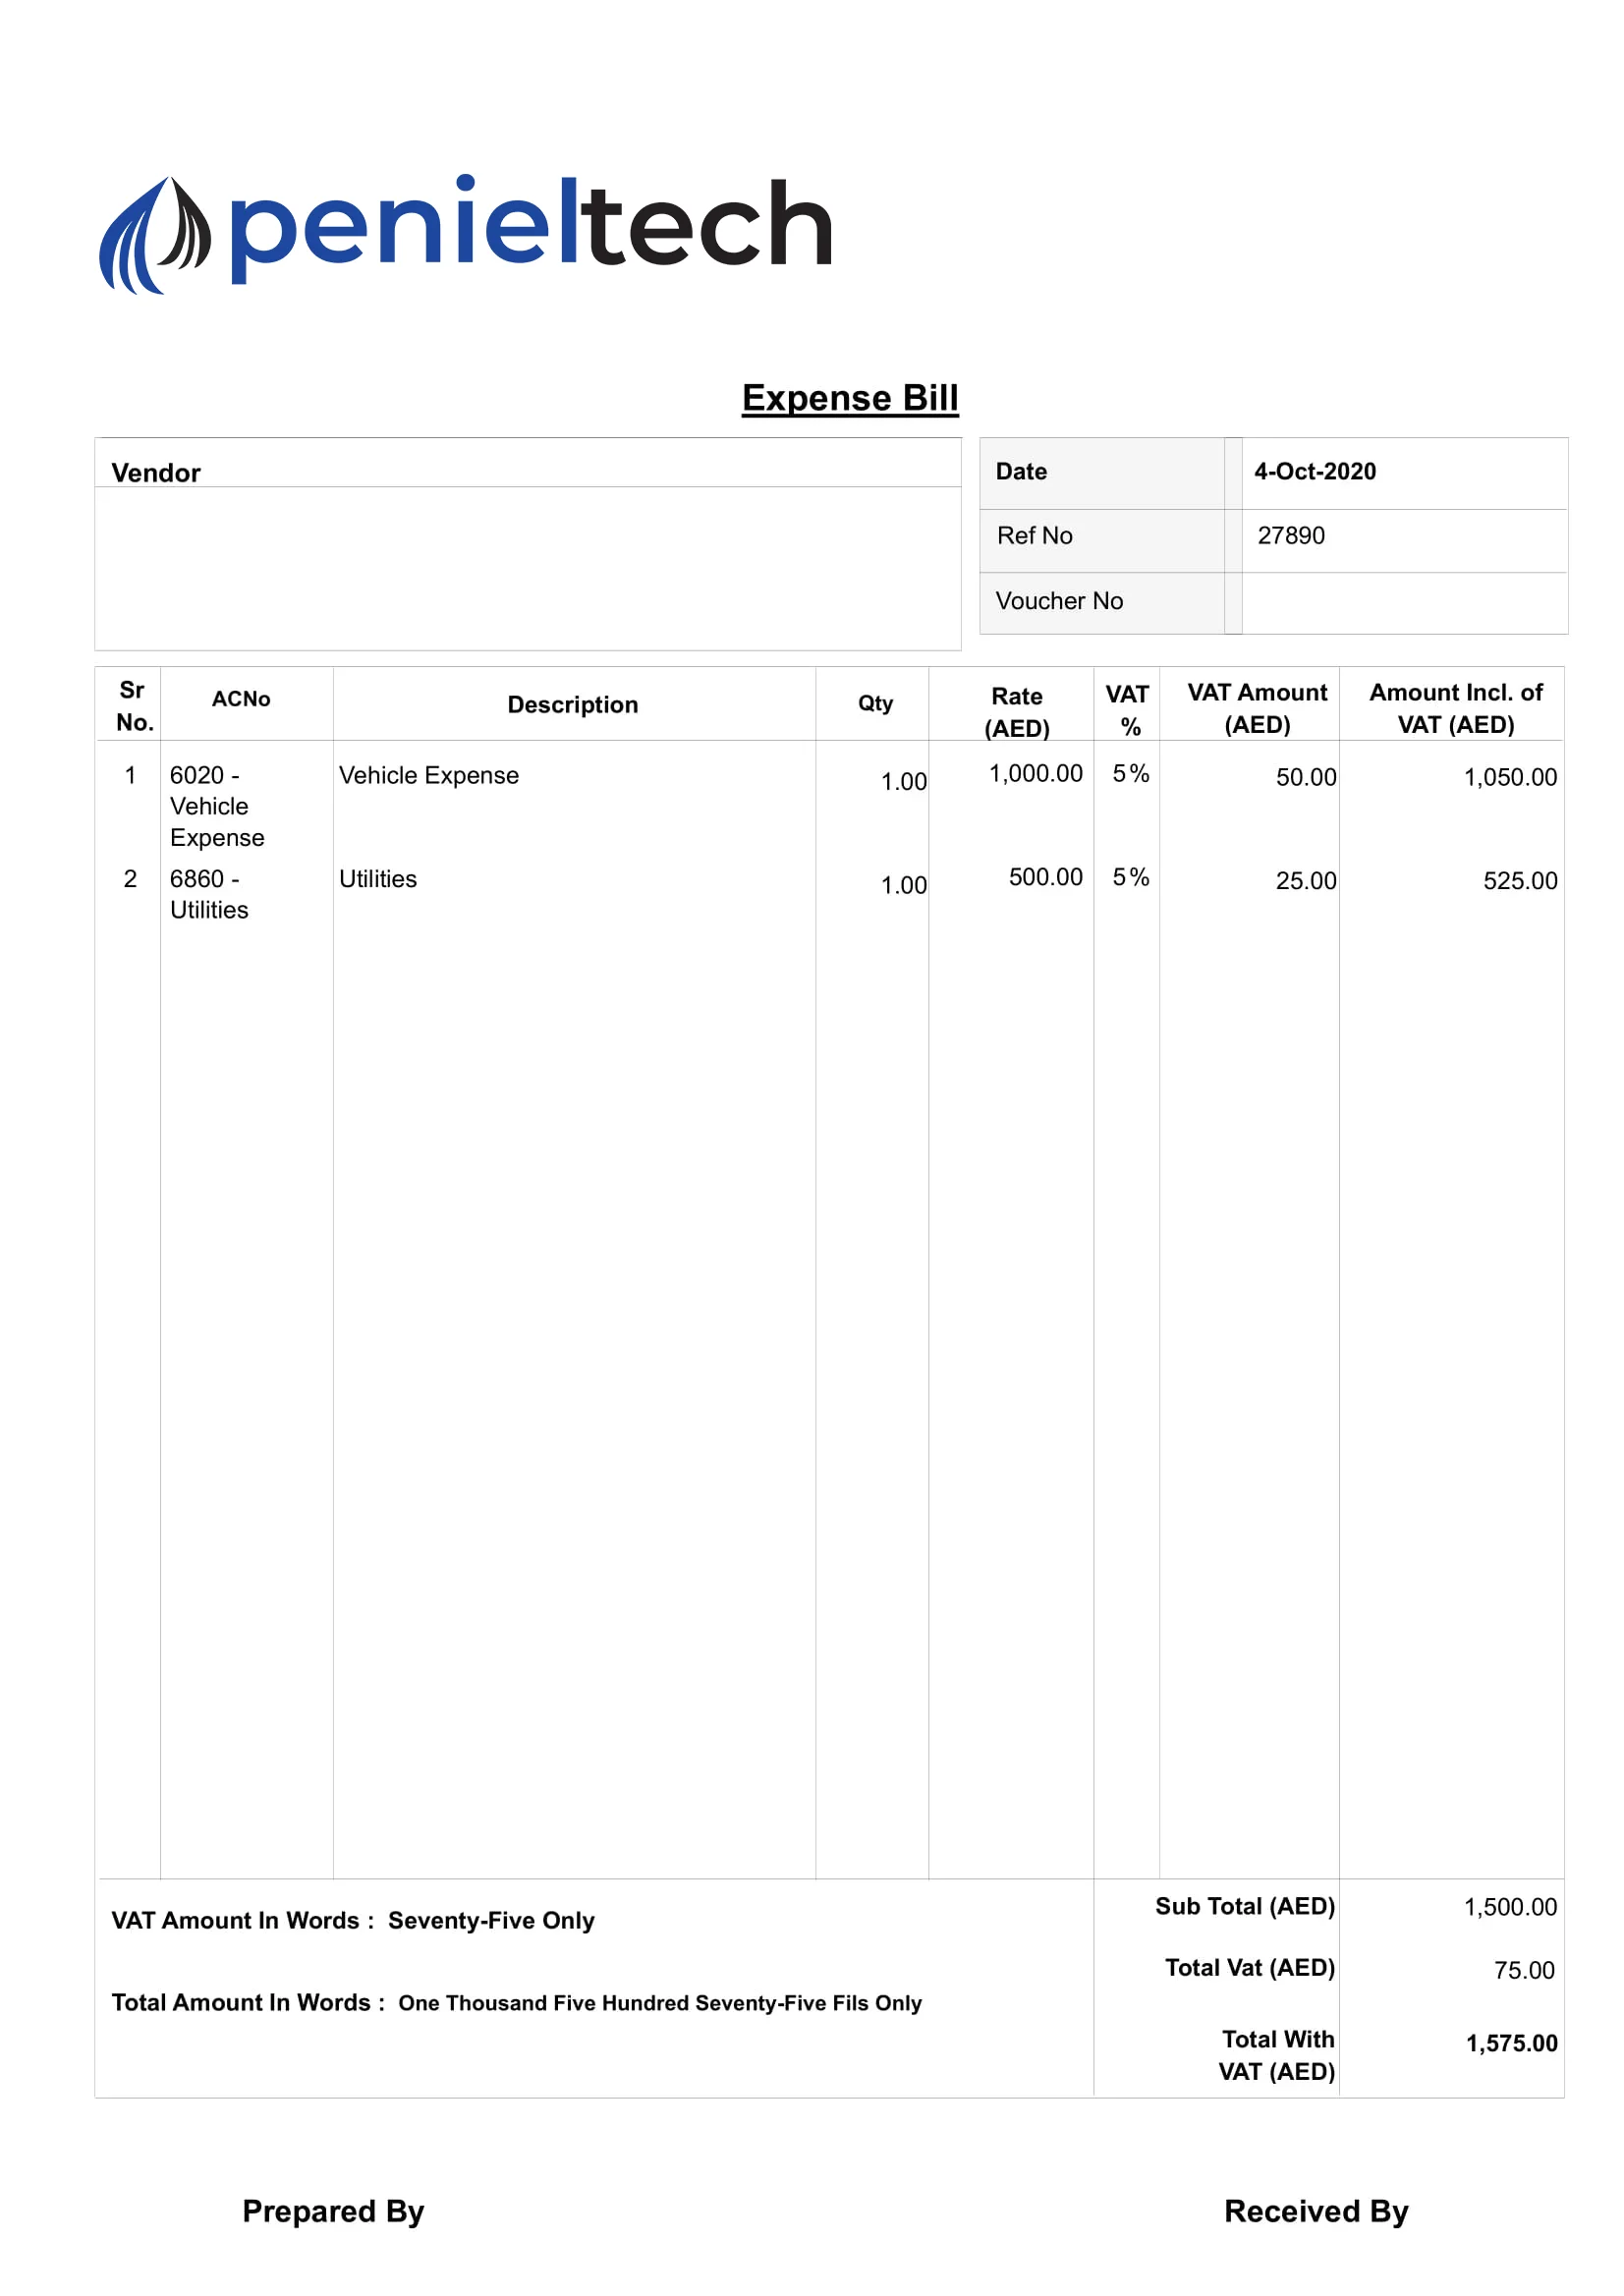 Expence Bill in QuickBooks - Penieltech